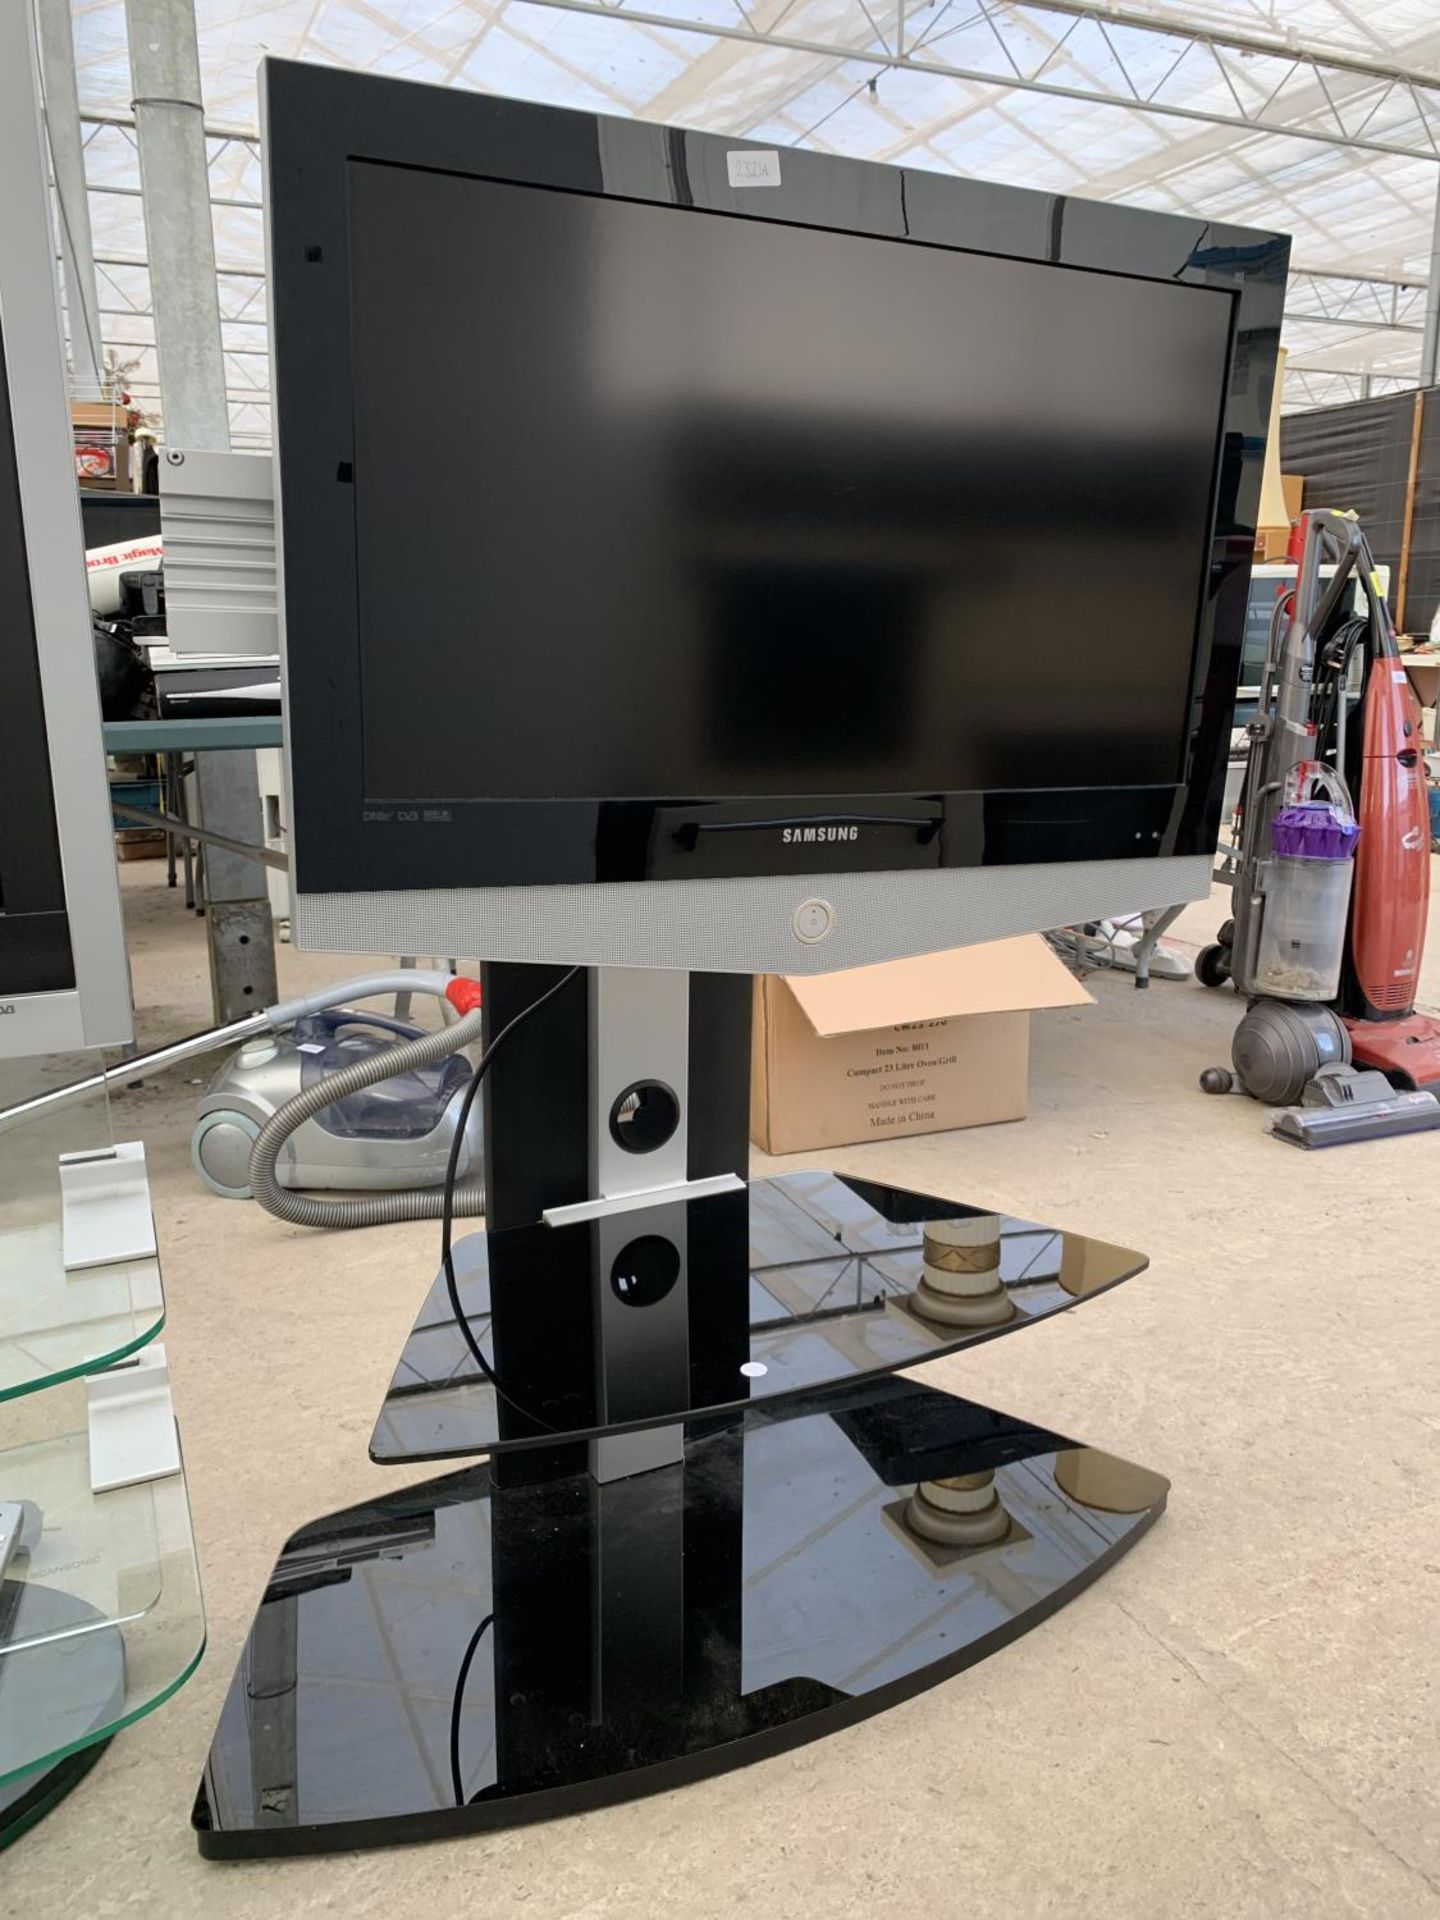 A SAMSUNG 32" TELEVISIOV ON GLASS DISPLAY STAND